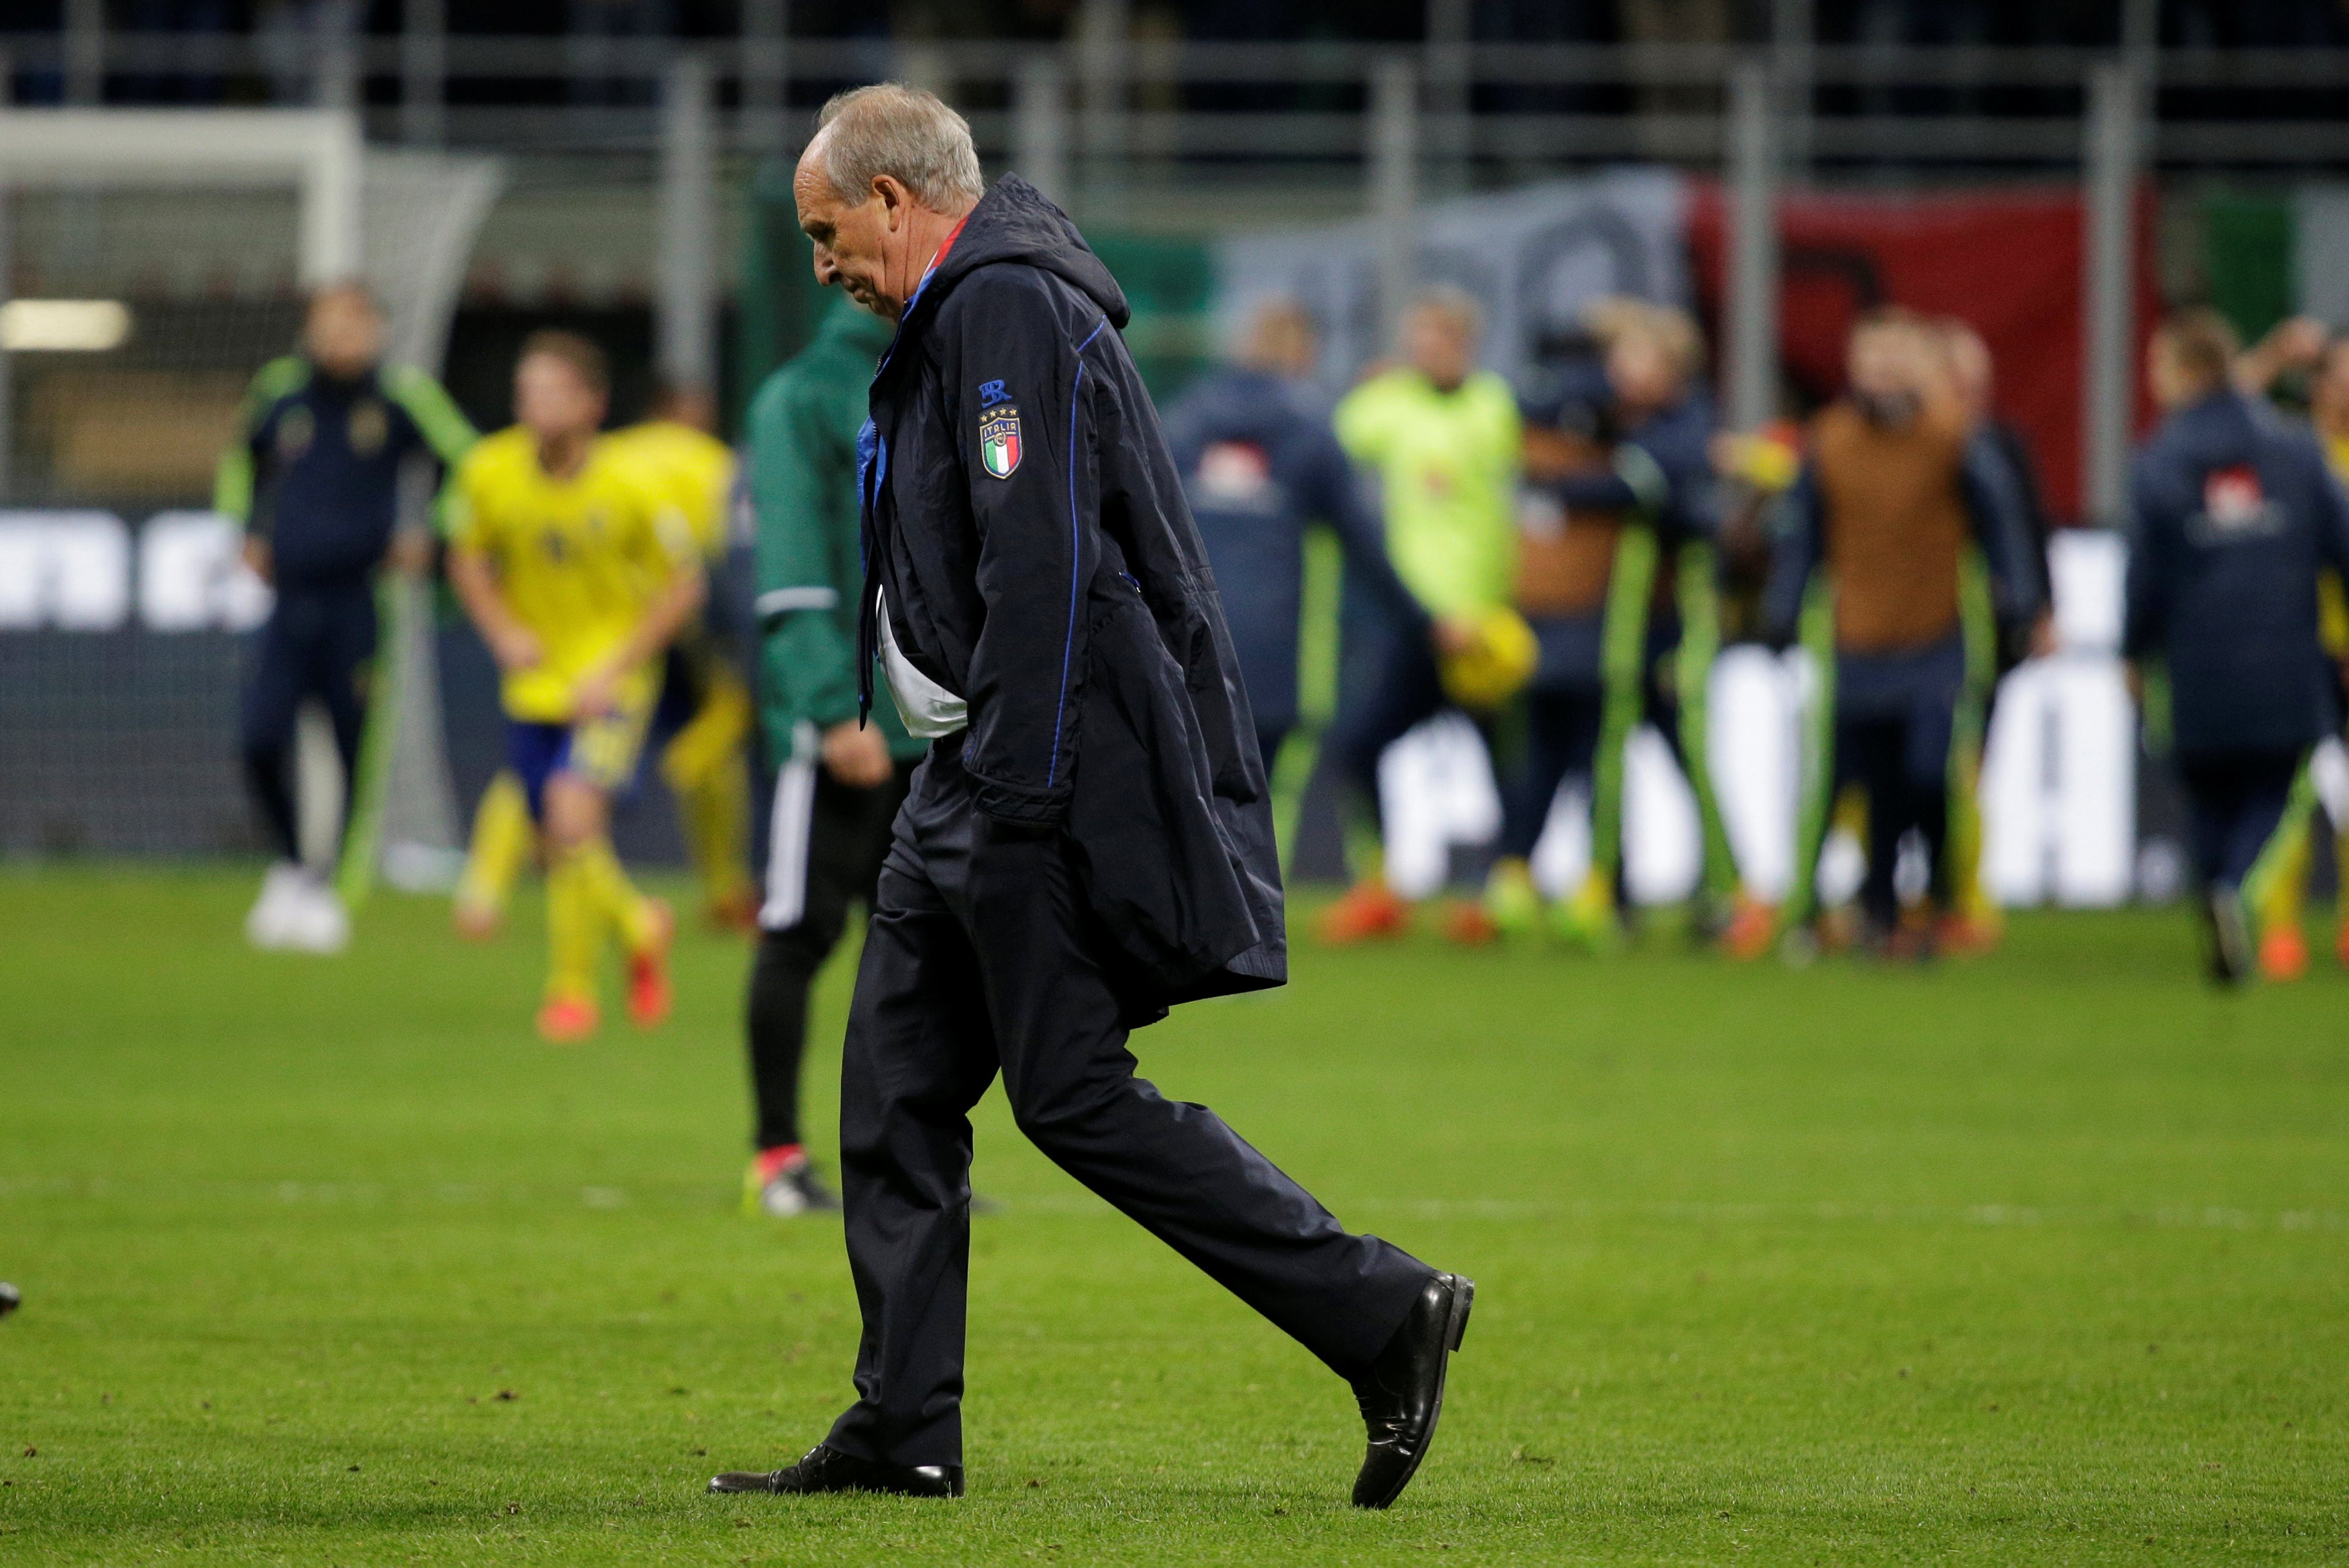 A disappointed Italy coach Gian Piero Ventura walks off the pitch after his team was knocked out of the 2018 World Cup. Ventura was dismissed on Wednesday as coach of the team. Photo: Reuters